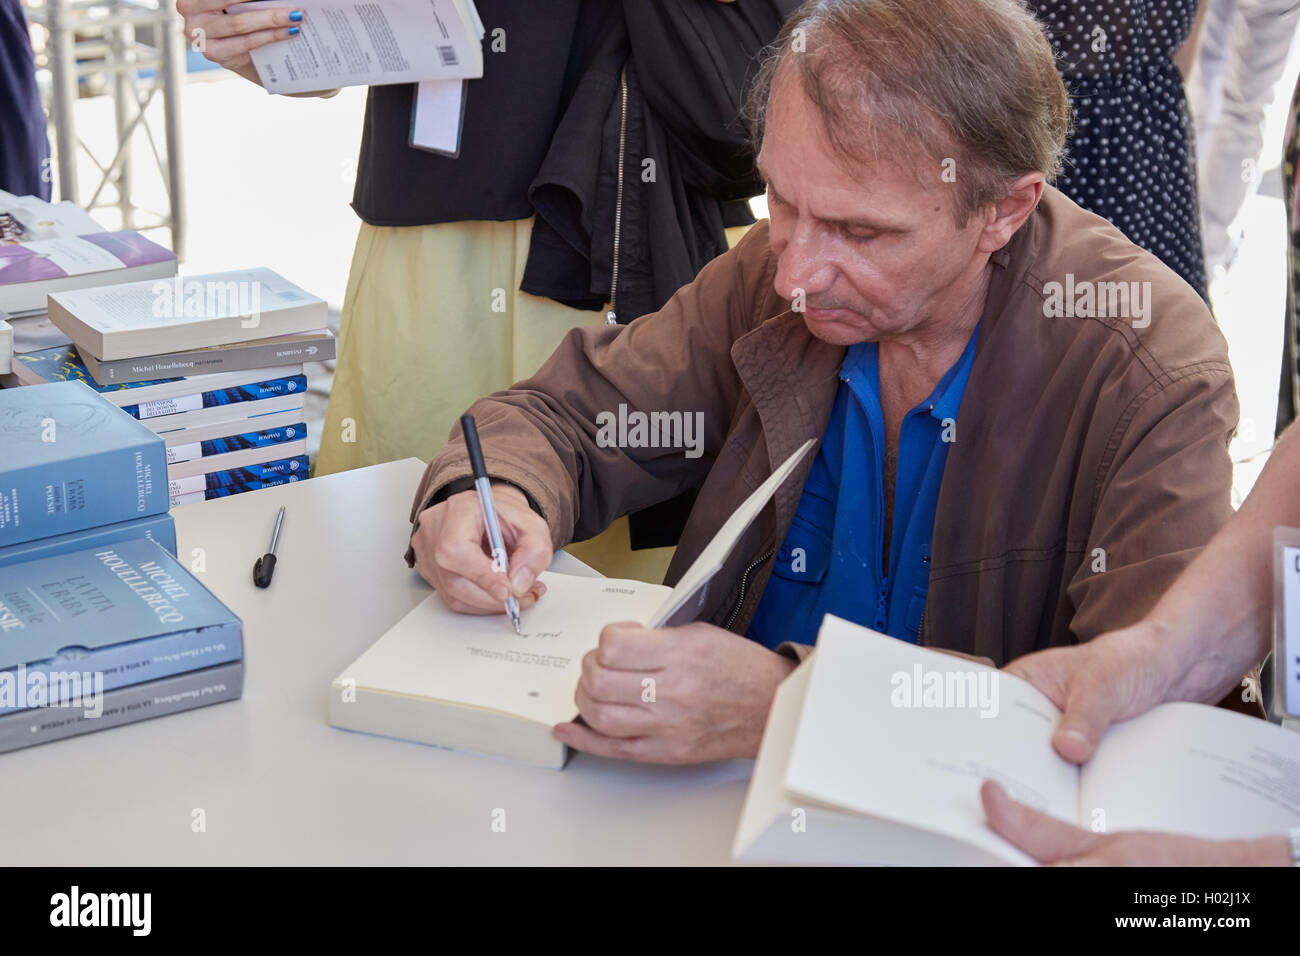 Writer Michel Houellebecq signing copies of his books during a festival Stock Photo